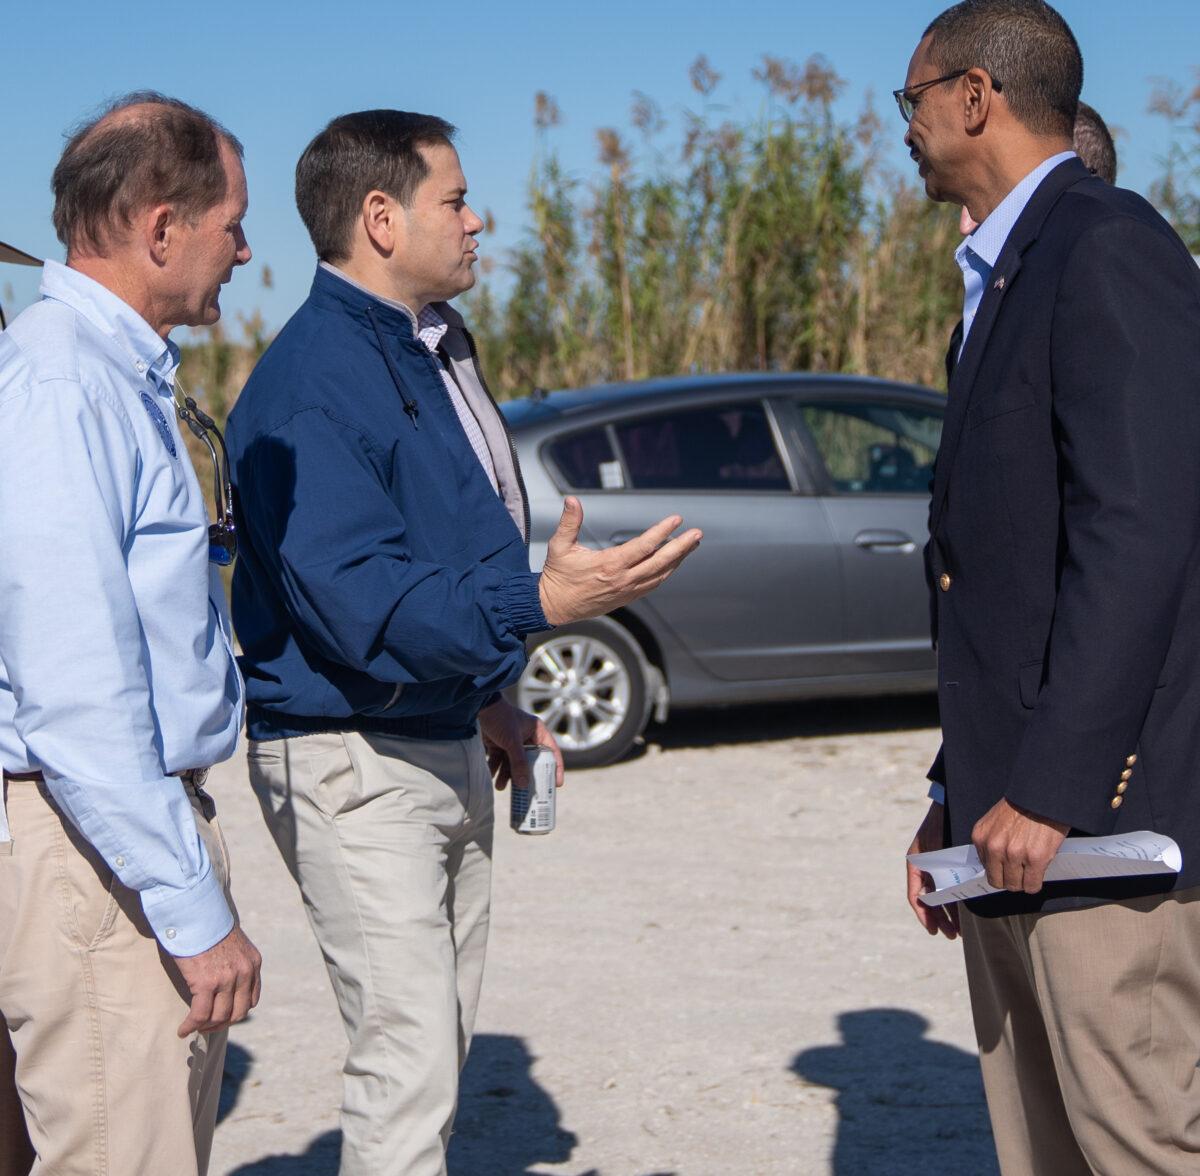 Two-term Republican incumbent U.S. Sen. Marco Rubio (R-Fla.), who is touting his 20 years of experience as an effective lawmaker in his November race against Democratic Rep. Val Demings (D-Fla.), speaks with Florida Department of Environmental Protection (DEP) Secretary Shawn Hamilton before a February 2022 press conference in the Everglades. (Courtesy of South Florida Water Management District)